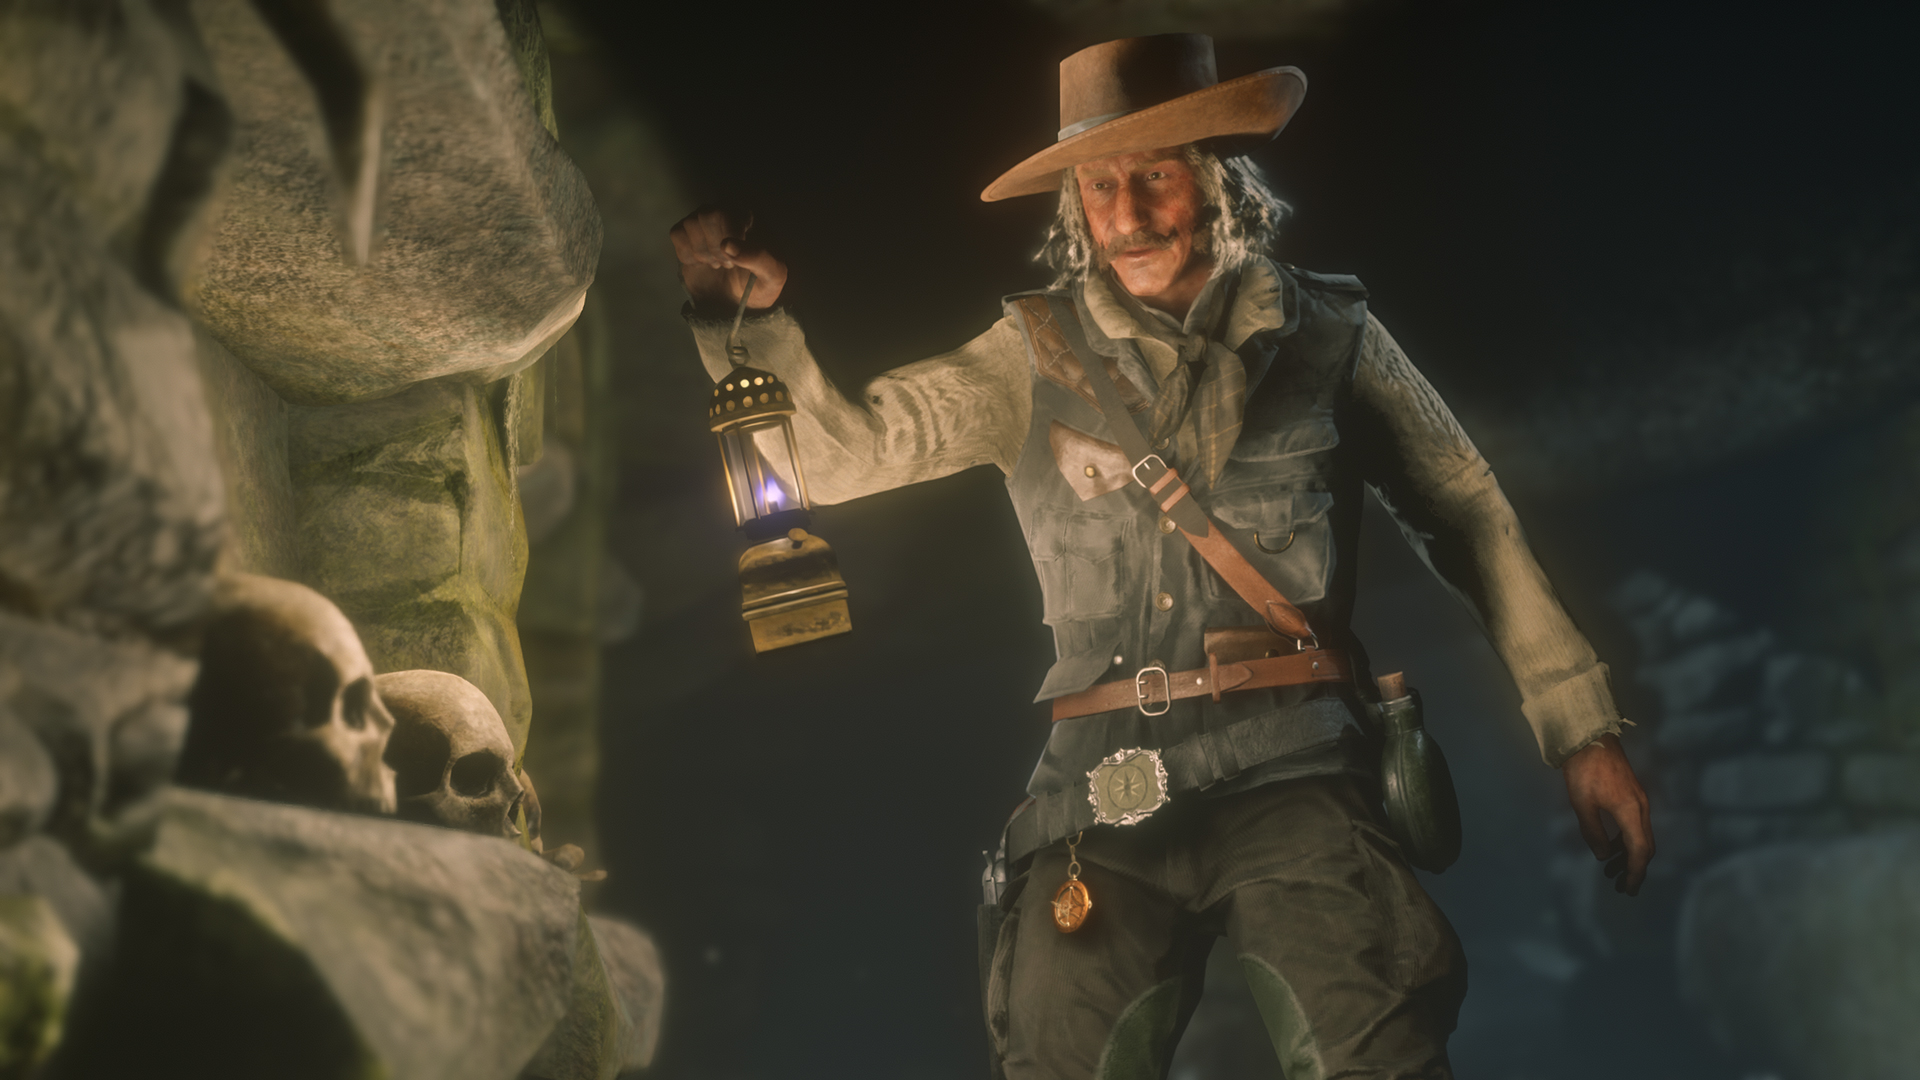 Dead Online' Collector Guide: How to Madam Nazar's Location In 'RDR2'